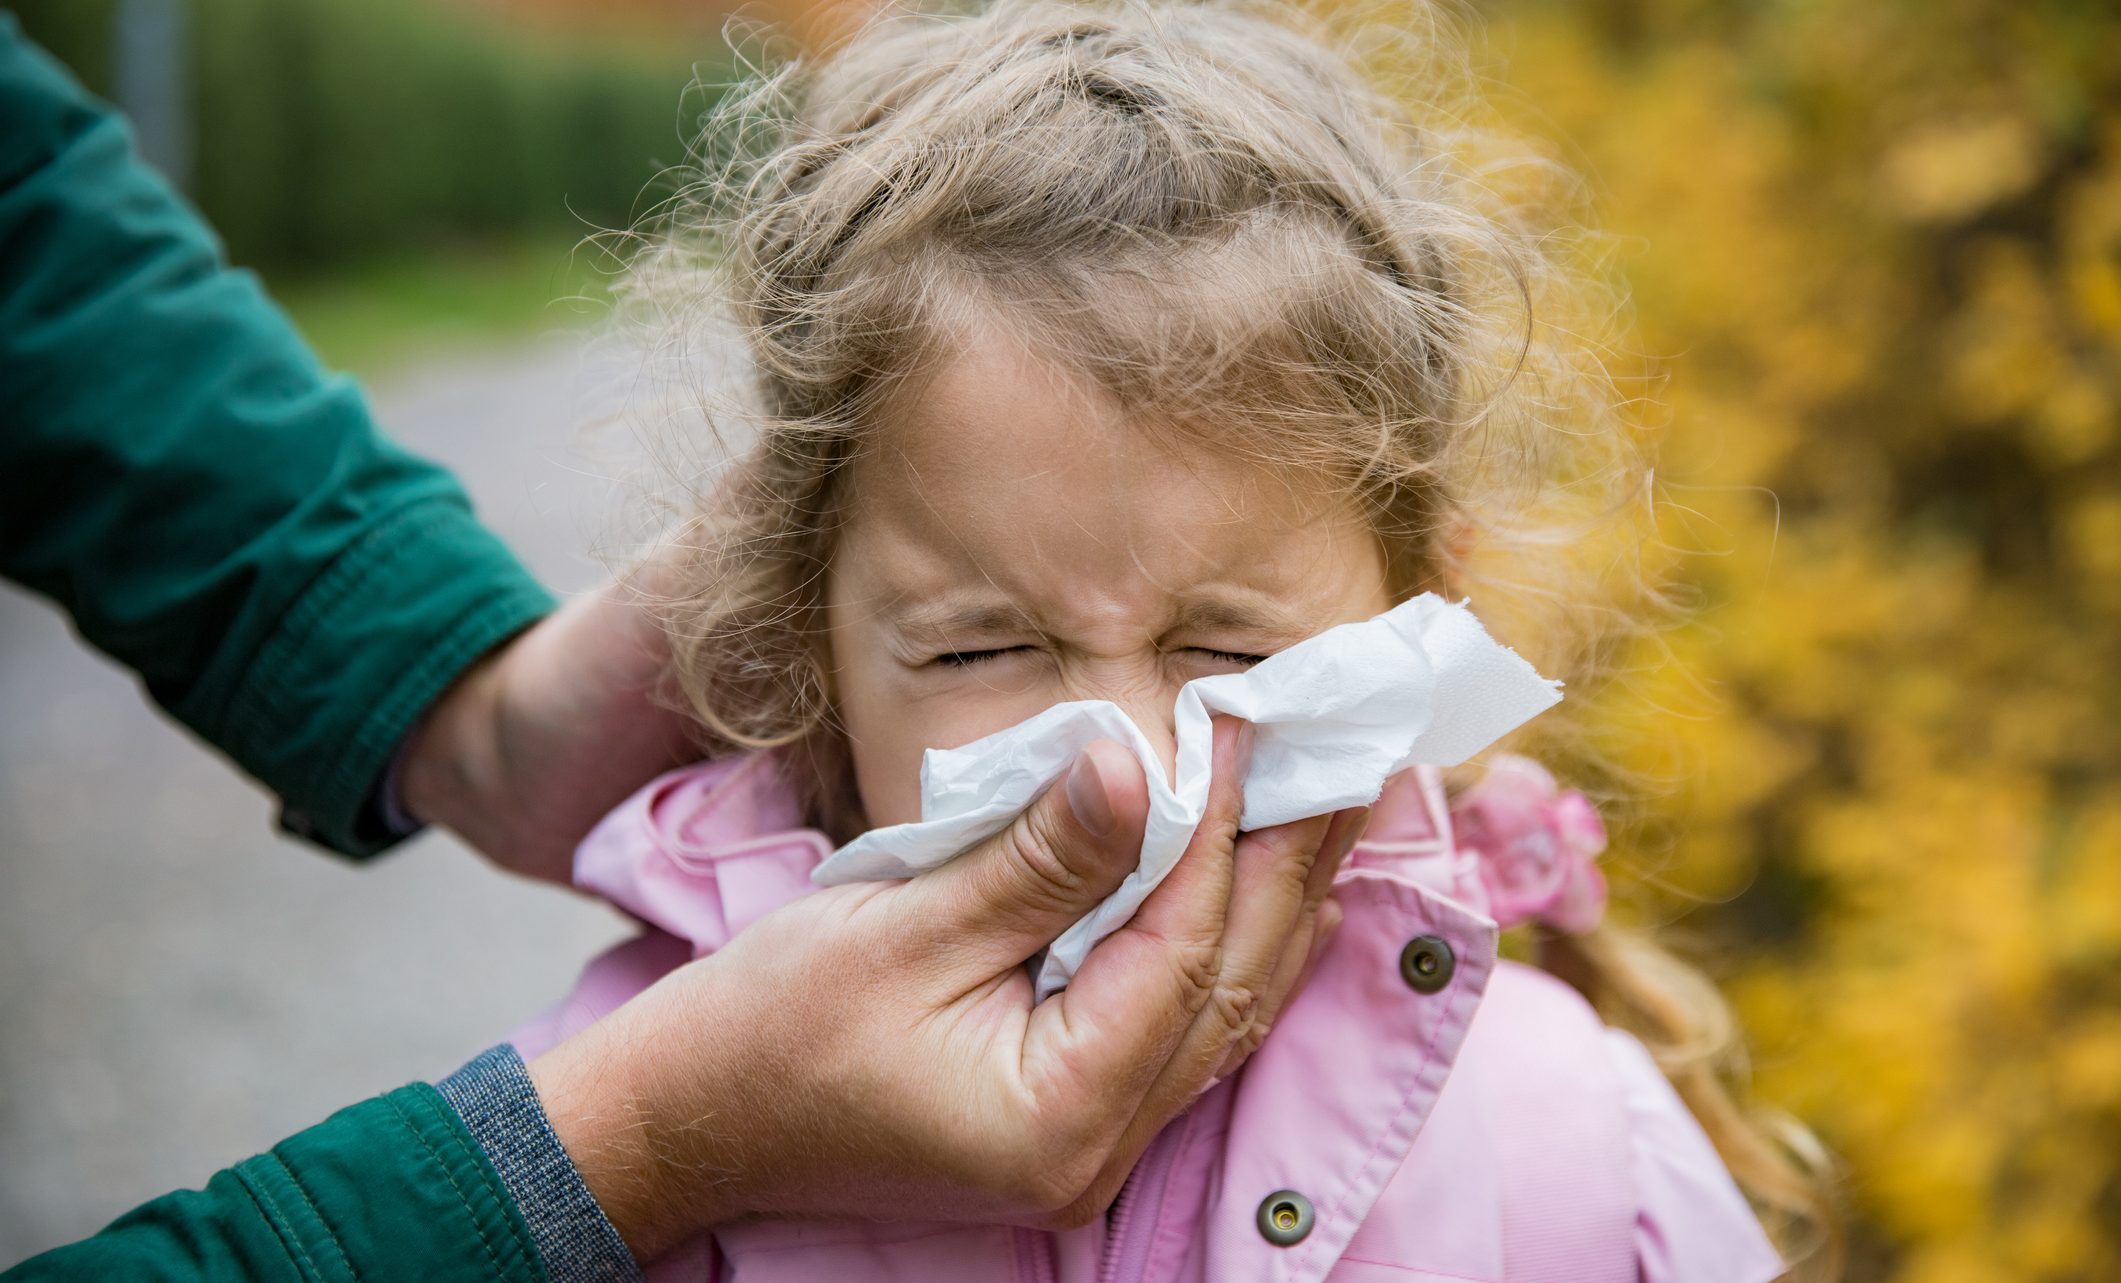 Researchers Discover Common Origin Behind Major Childhood Allergies